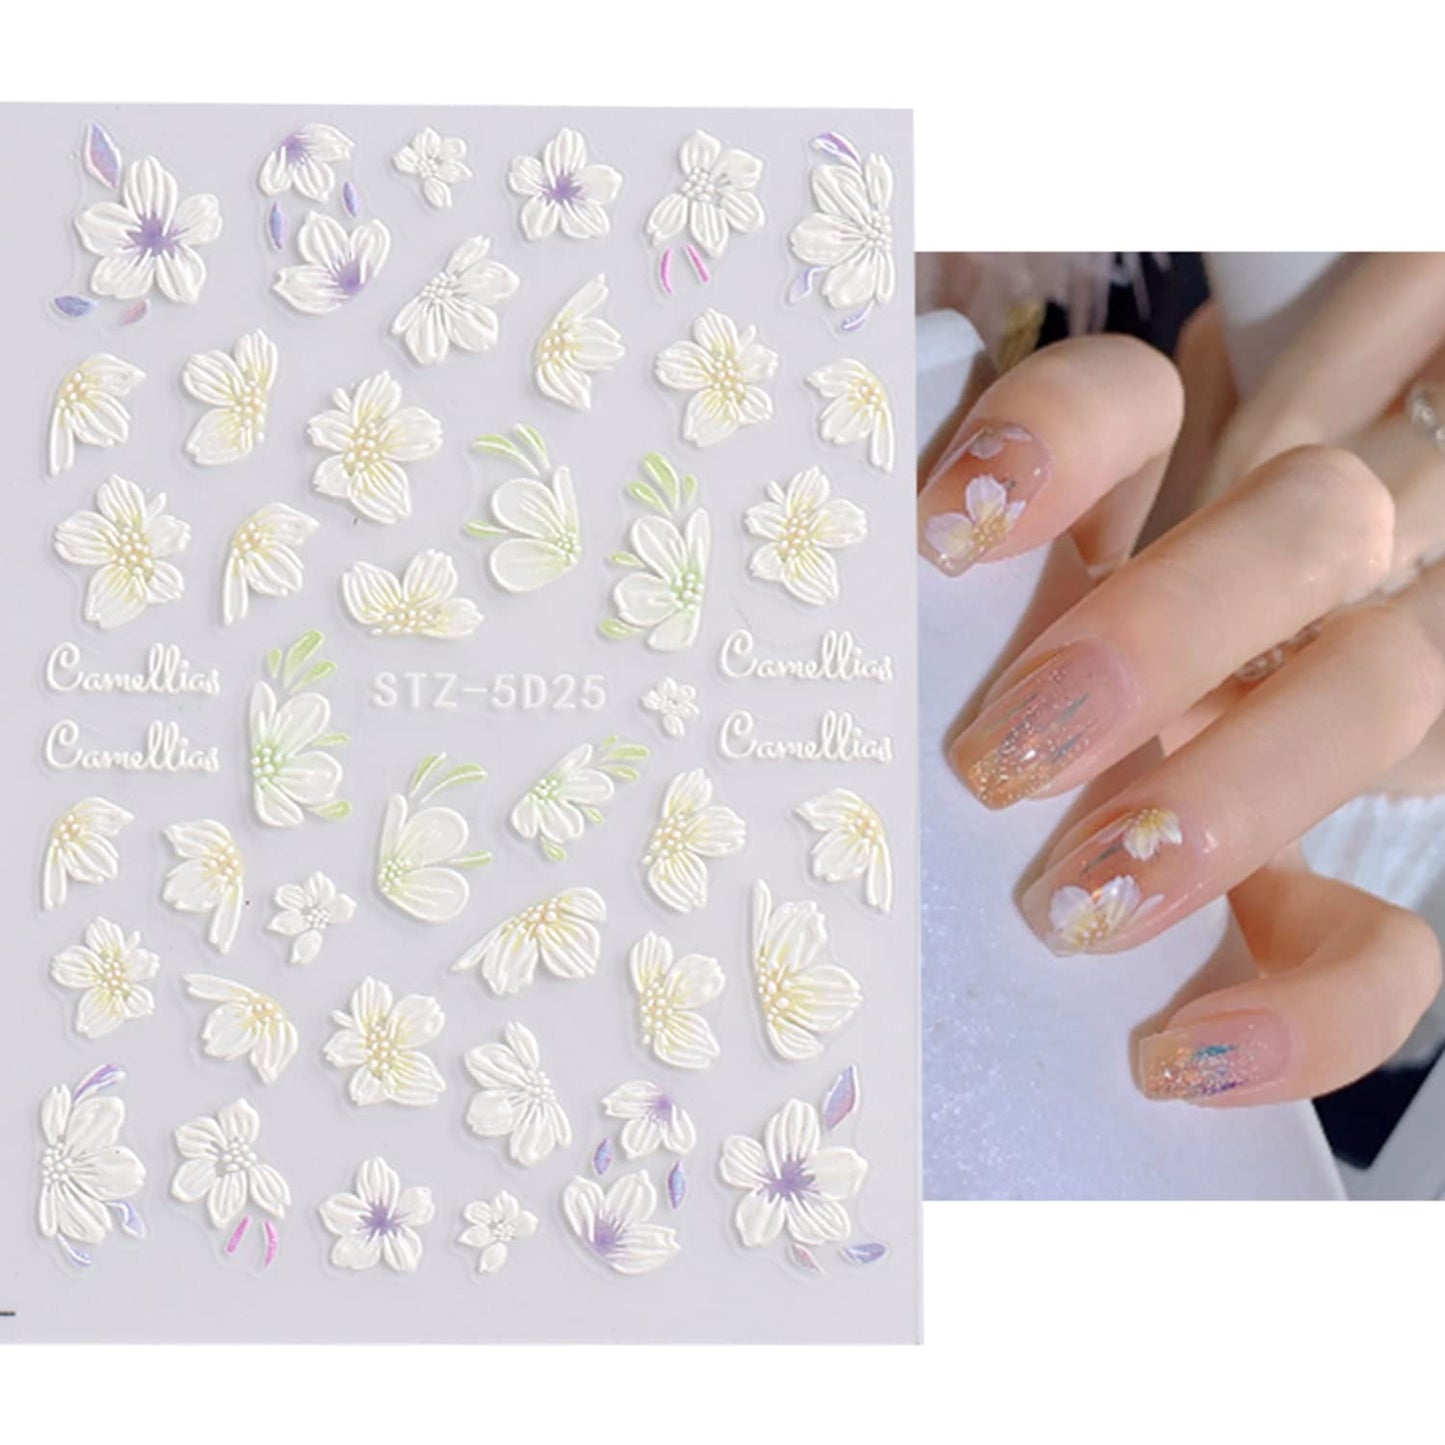 ZZIYEETTM 5D Embossed Spring Flower Nail Art Stickers Decals 6 Sheets Engraved Butterfly French Tips Nail Designs Adhesive Nail Stickers for Women